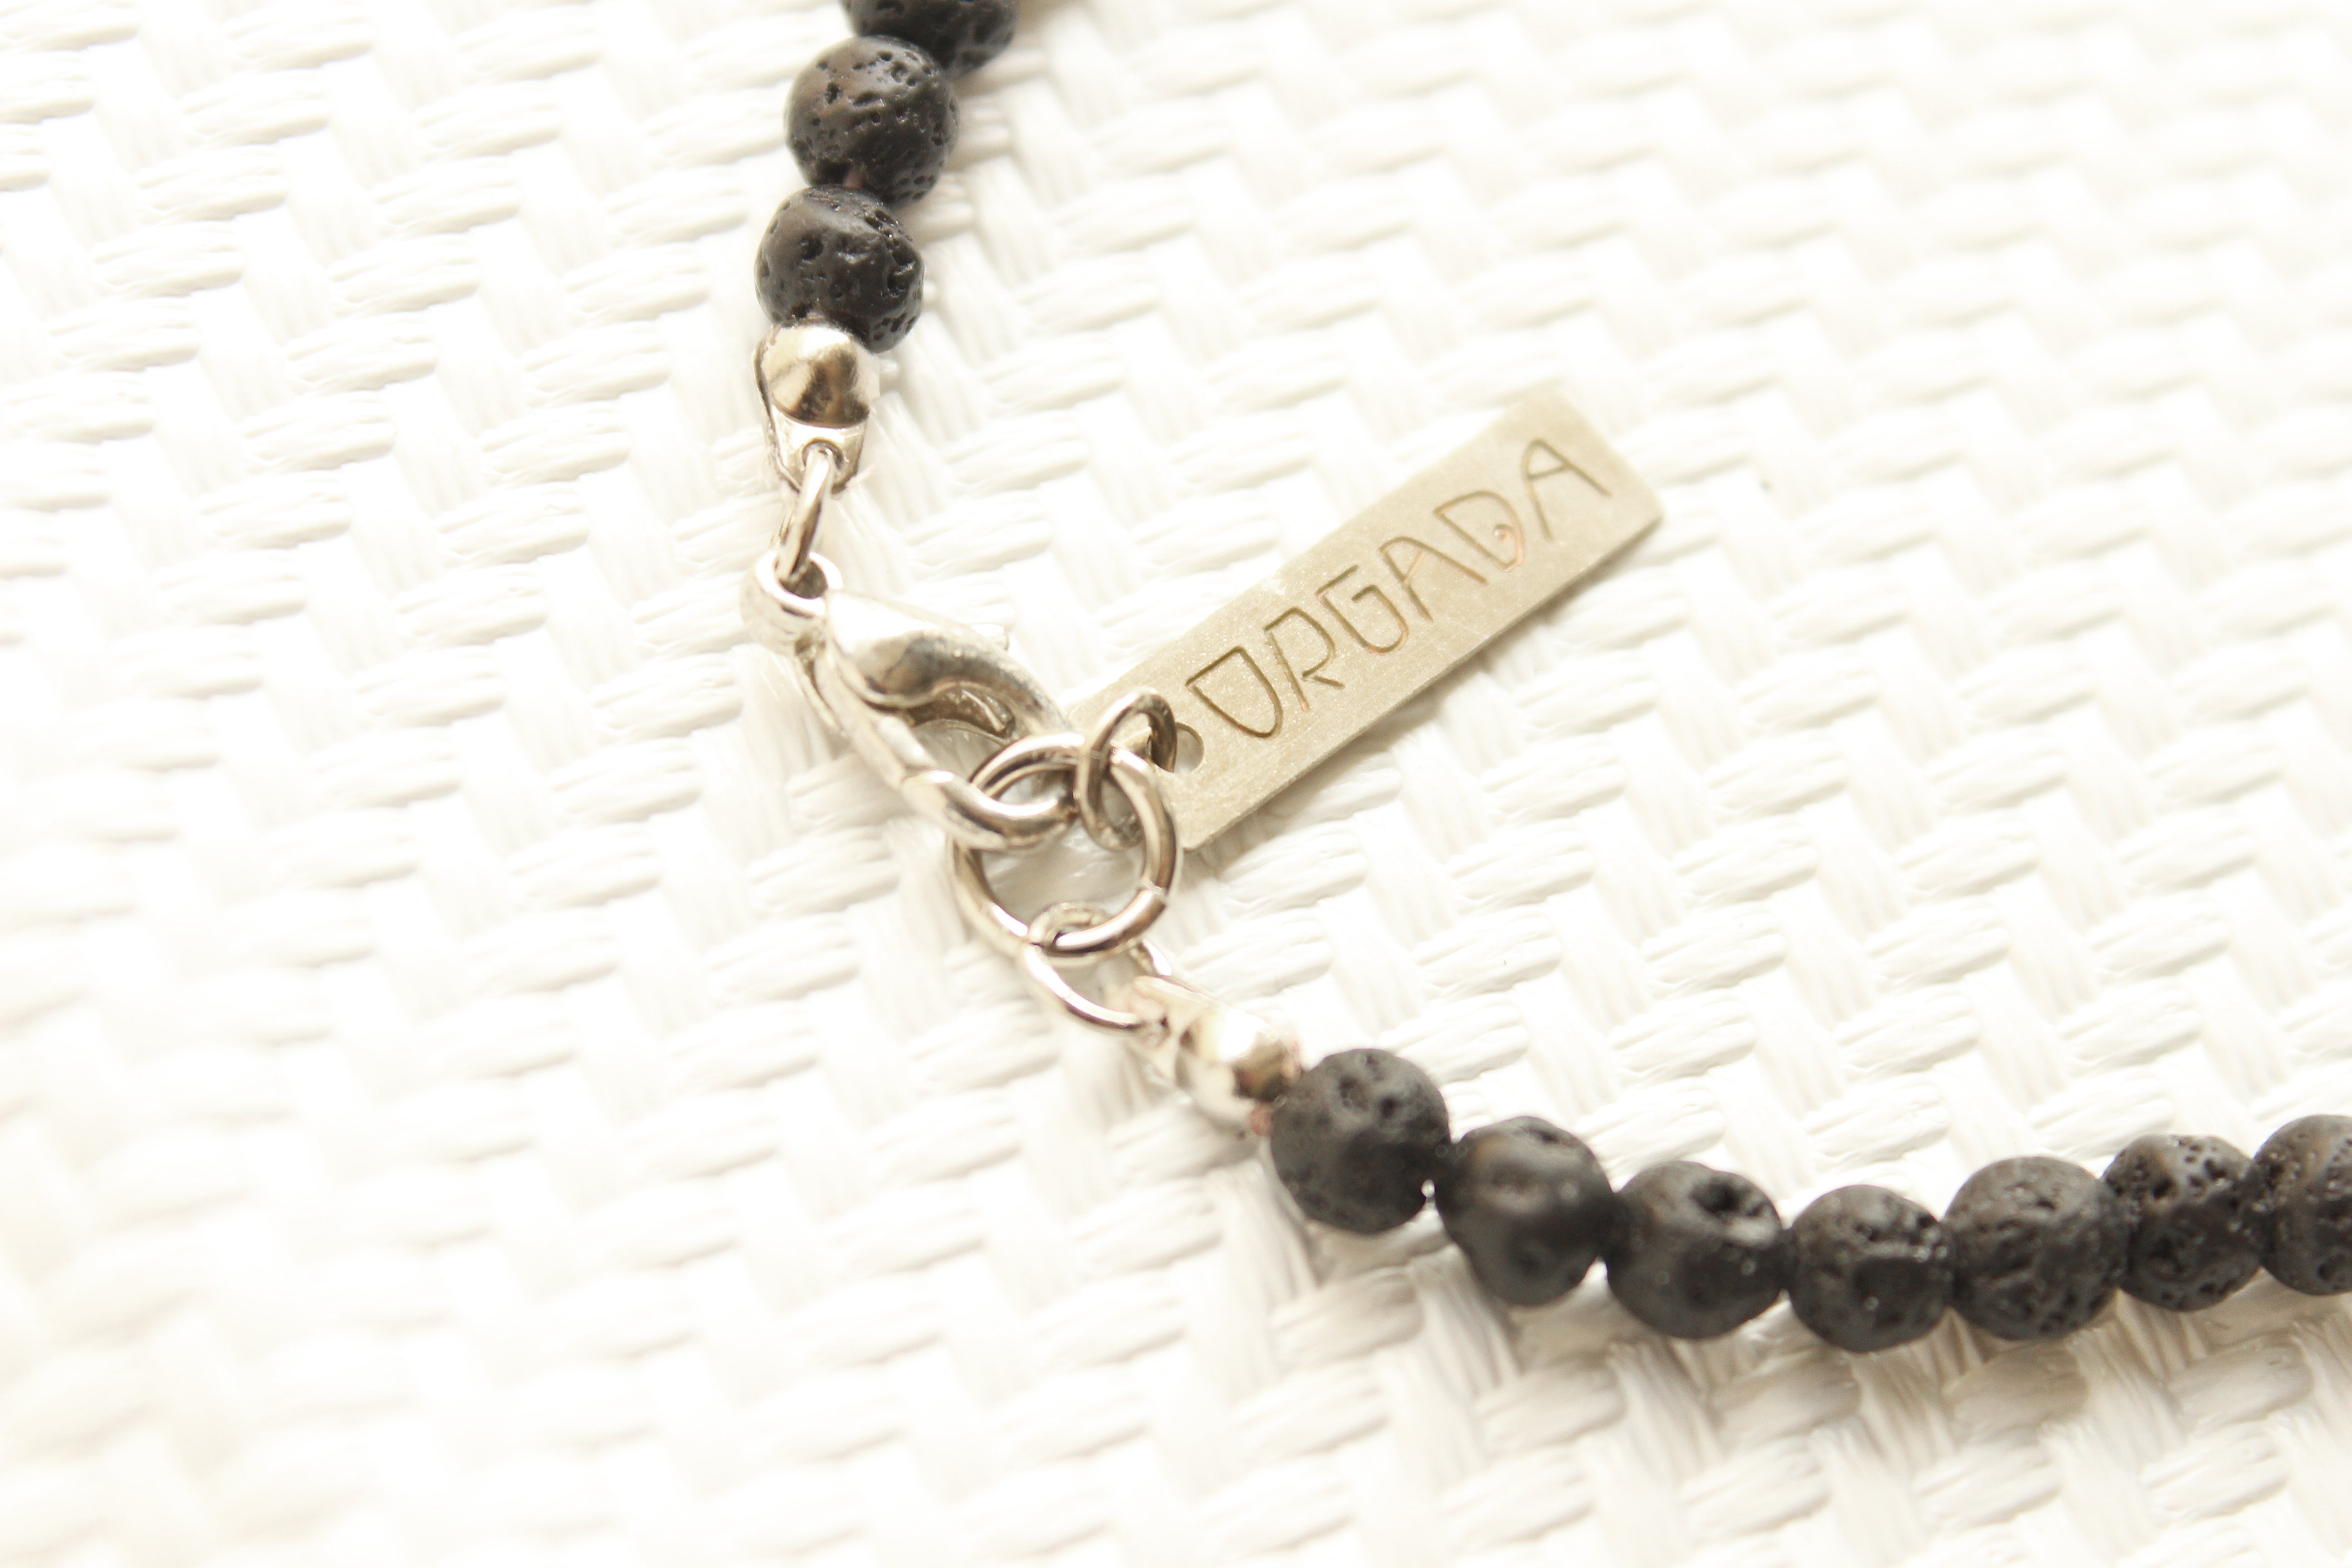 ORGADA necklace made of black lava beads and a lobster clasp closure photographed in close-up